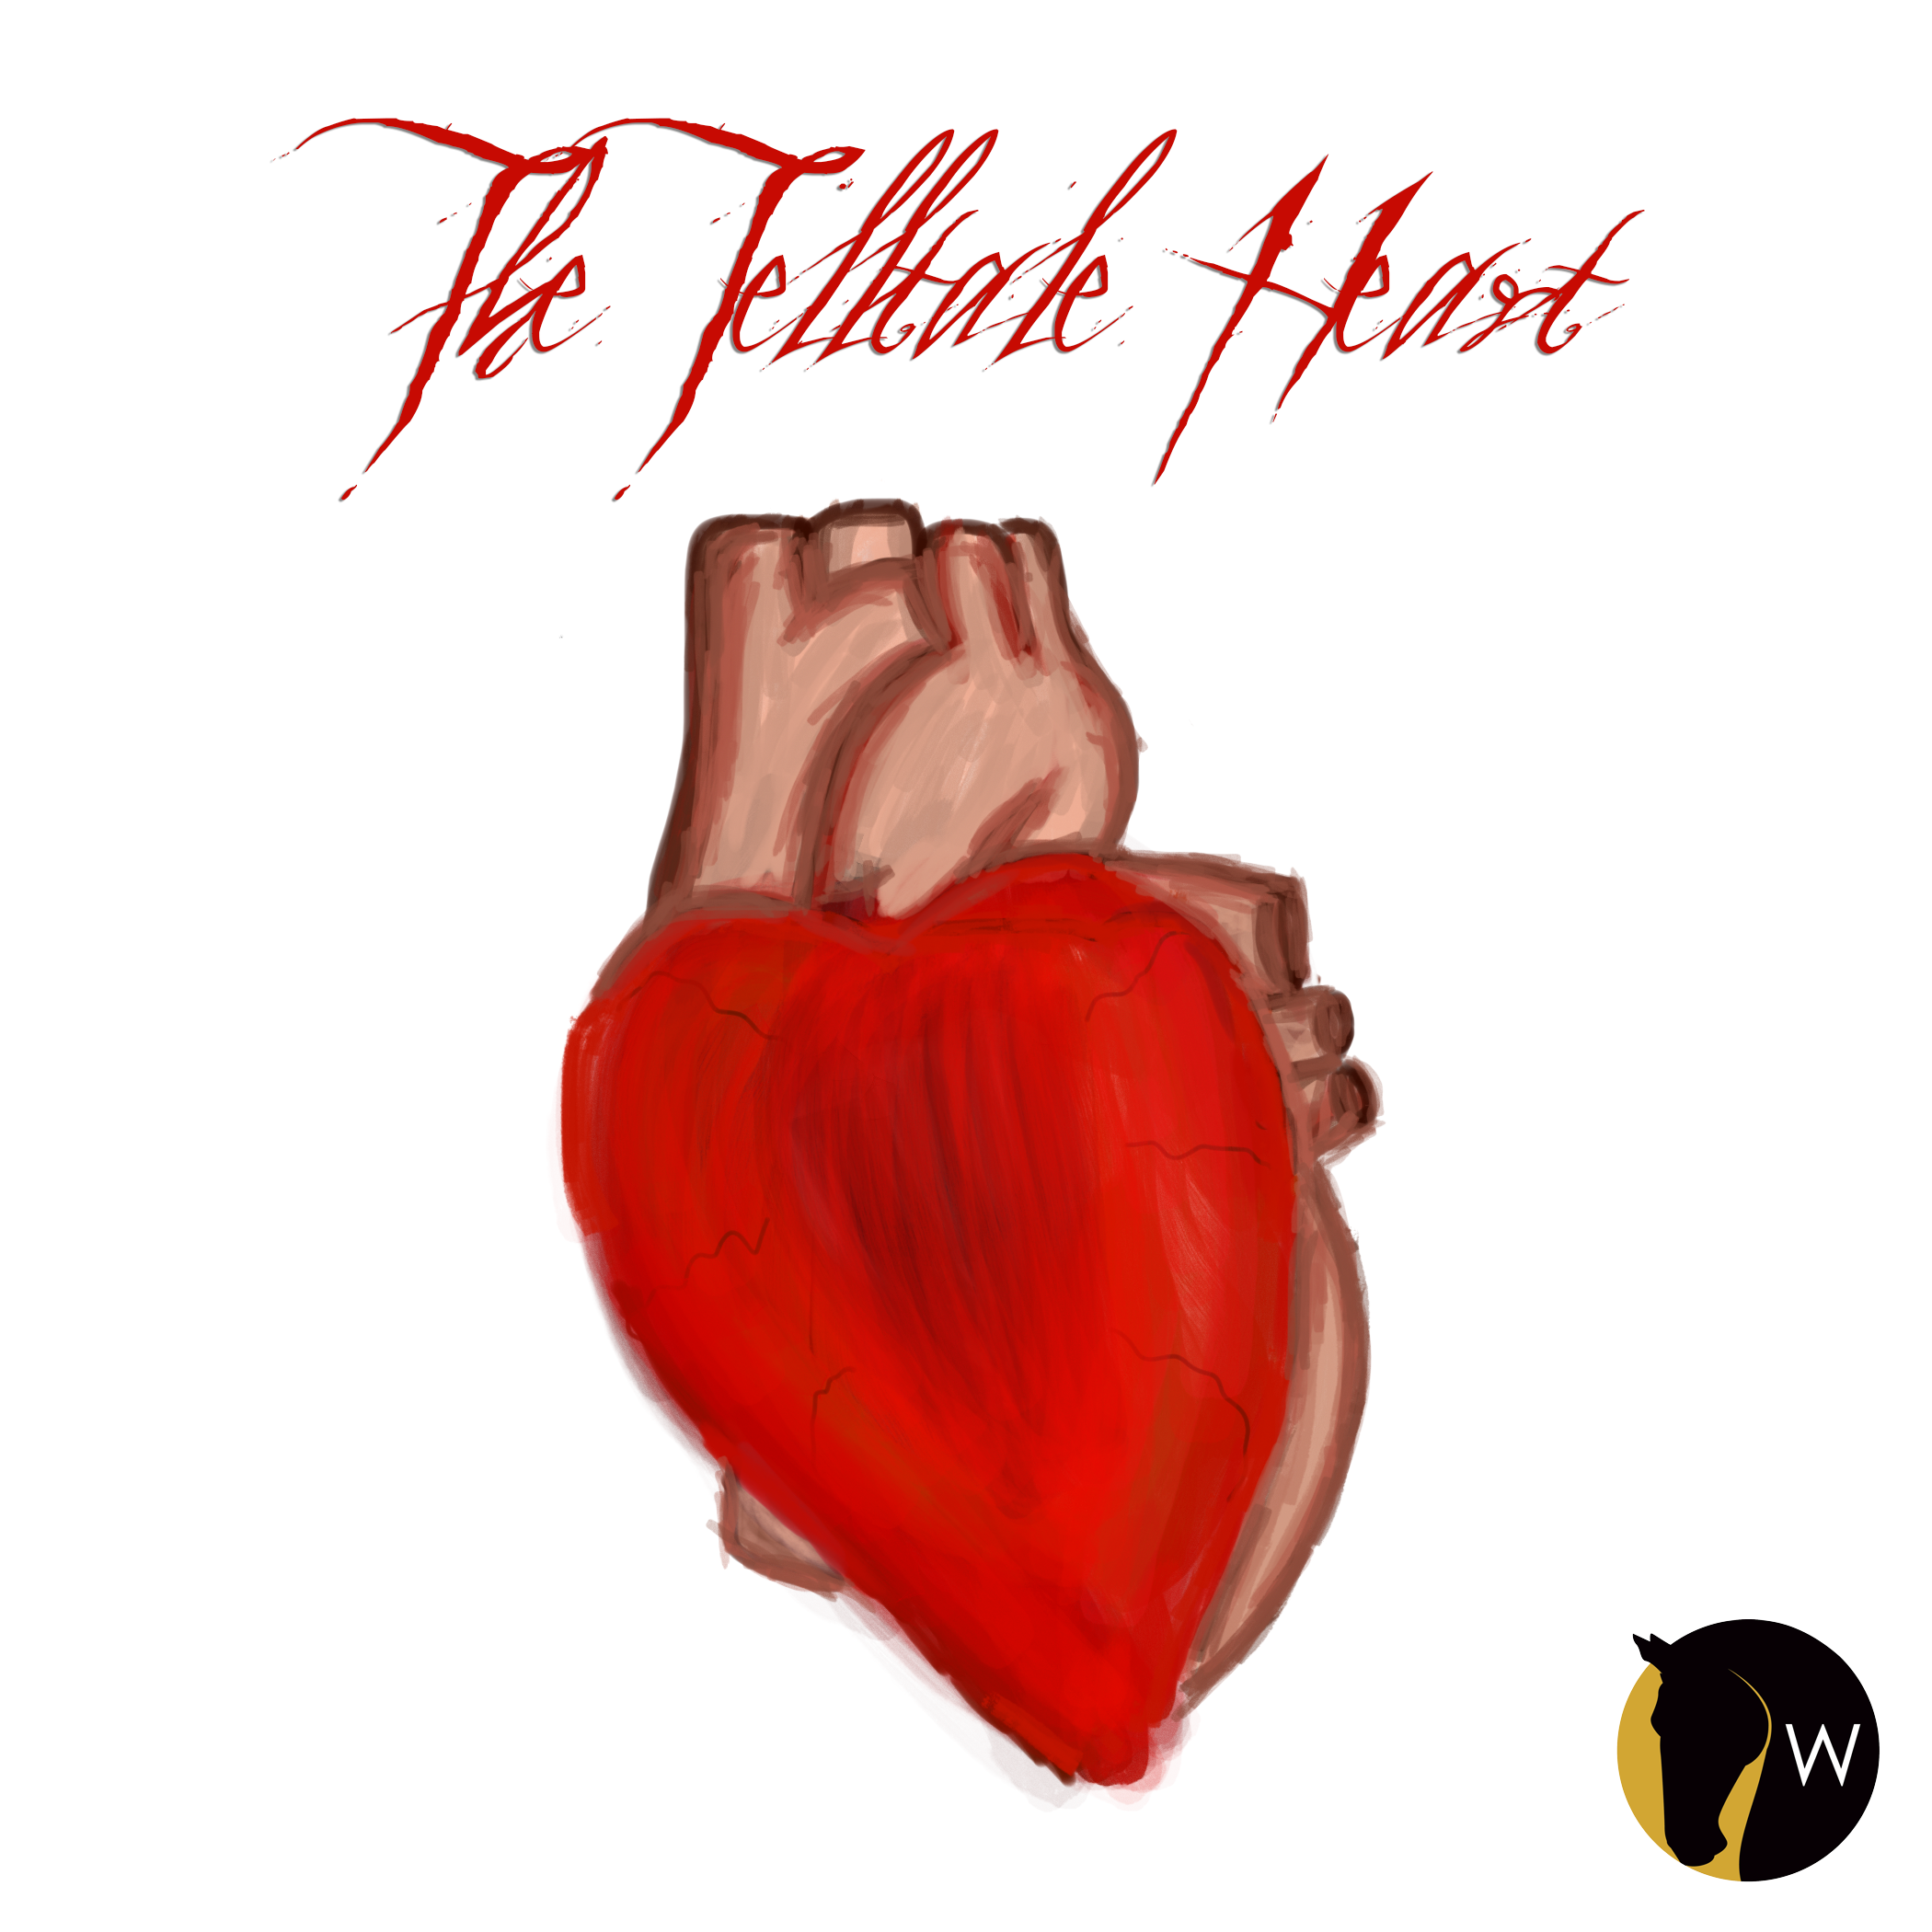 ”The Telltale Heart” - 103 Theater for the Mind